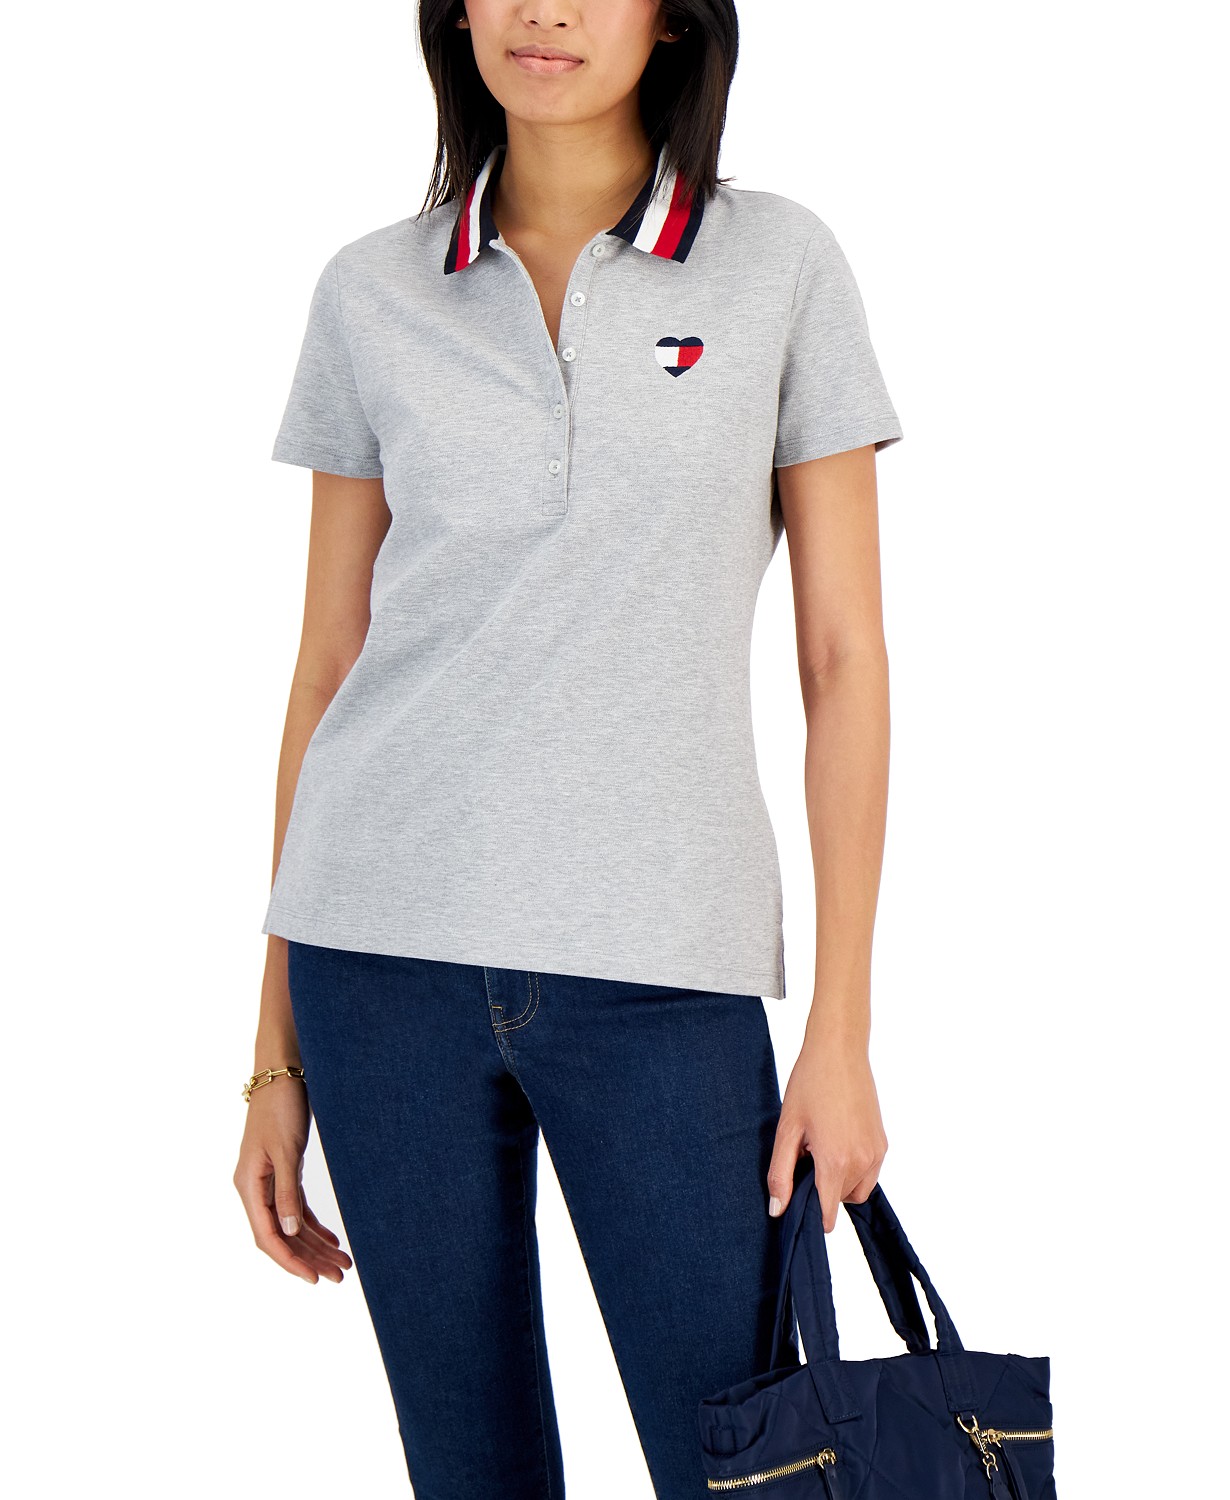 Womens Embroidered Heart Logo Polo Top